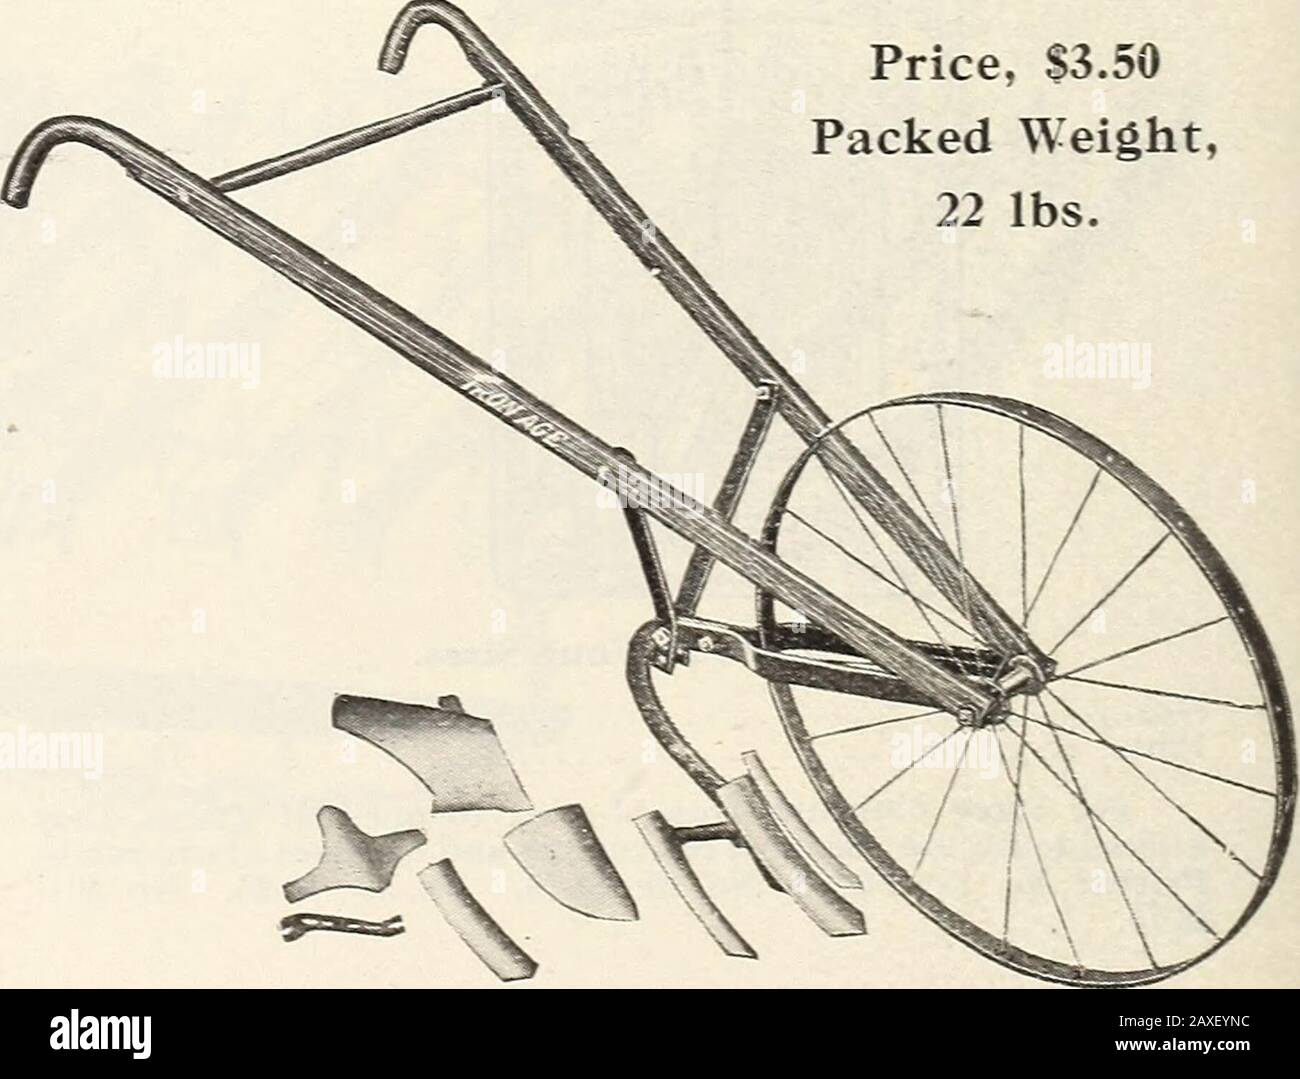 Mann's descriptive catalgoue : 1914 guide for the farm and garden . Price, $3.50 Packed Weight, 22 lbs.. No. 19-G IRON AGE Wheel Plow Cultivator 38 SEEDS AND IMPLEMENTS PLANET Jr. FARM AND GARDEN TOOLS PLANET JR. TOOLS enable you to do two days work in one, easier, cheaper, bet-ter, with less fatigue. They pay for themselves in a season. Write today for acopy of the 1914 Planter Jr. Catalogue, a finely illustrated, instructive handbook.Describes entire Planet Jr. line, including seeders, wheel hoes, hand, one and two-horse cultivators, liar rows, etc. Stock Photo